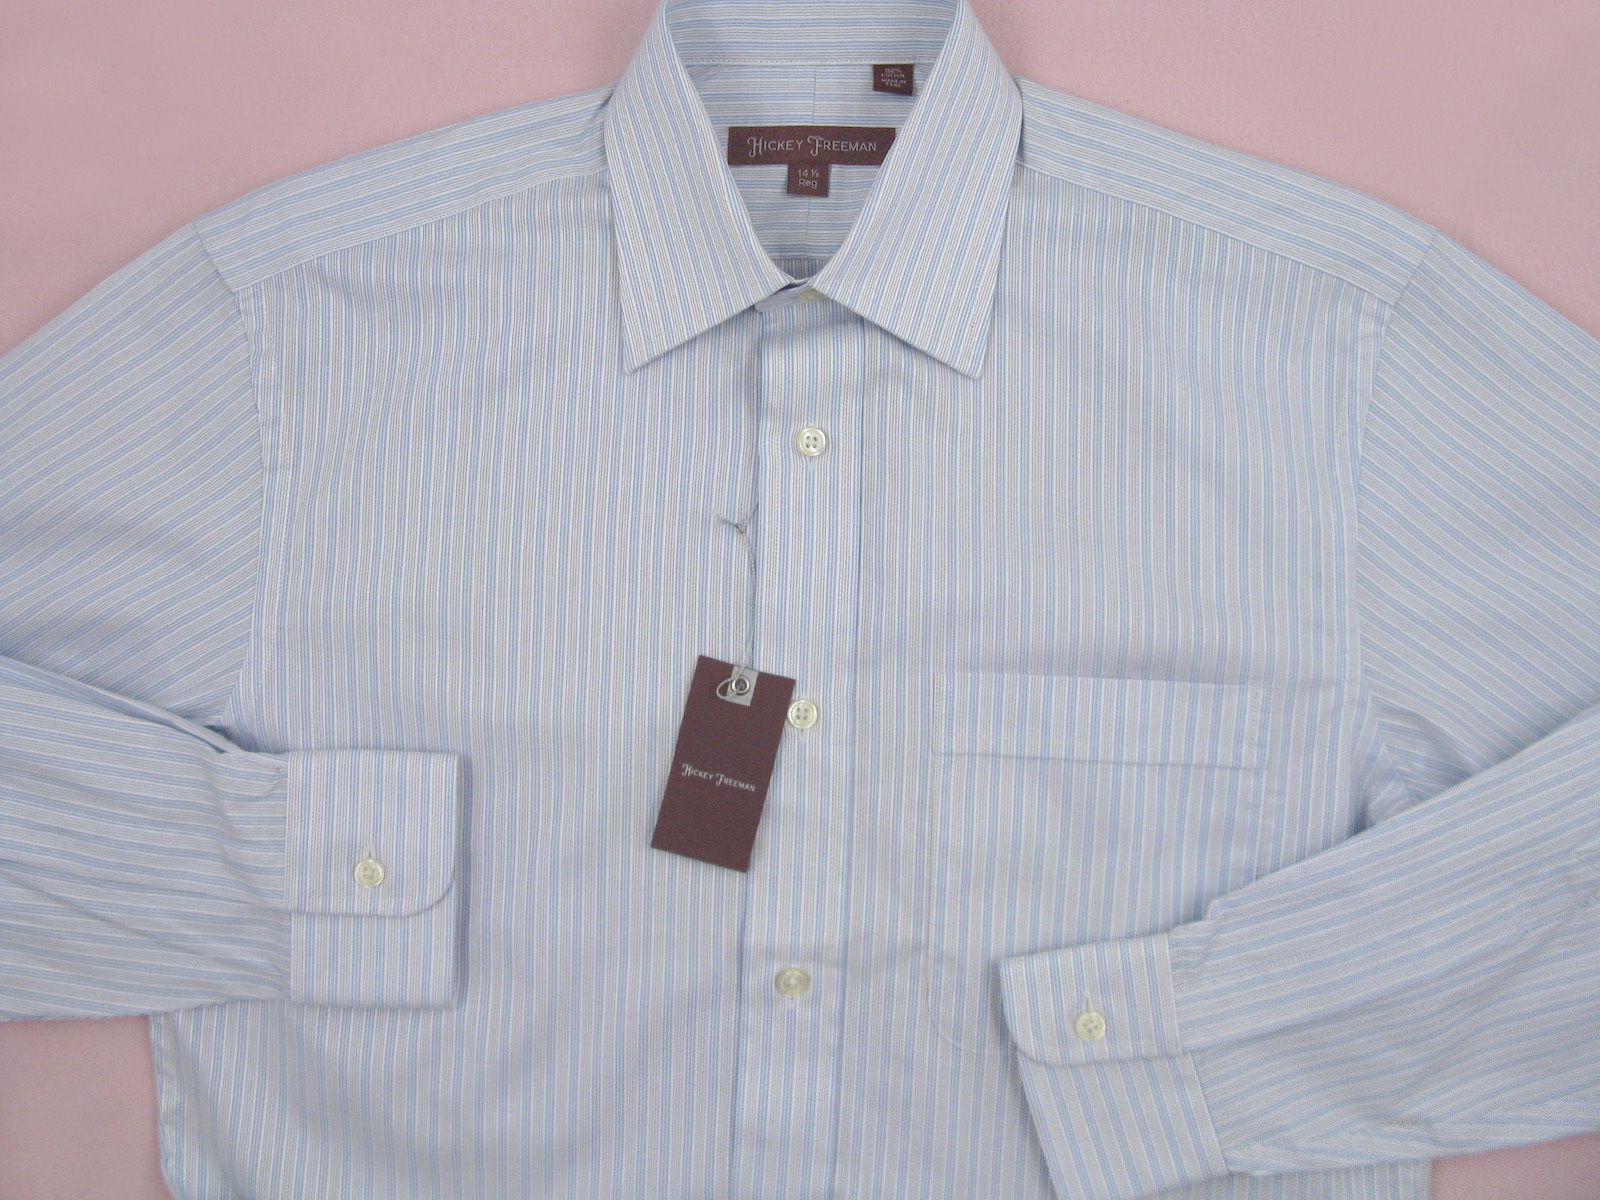 Primary image for NEW $195 Hickey Freeman Dress Shirt! 15.5 Long (35)  White, Blue & Black Stripes